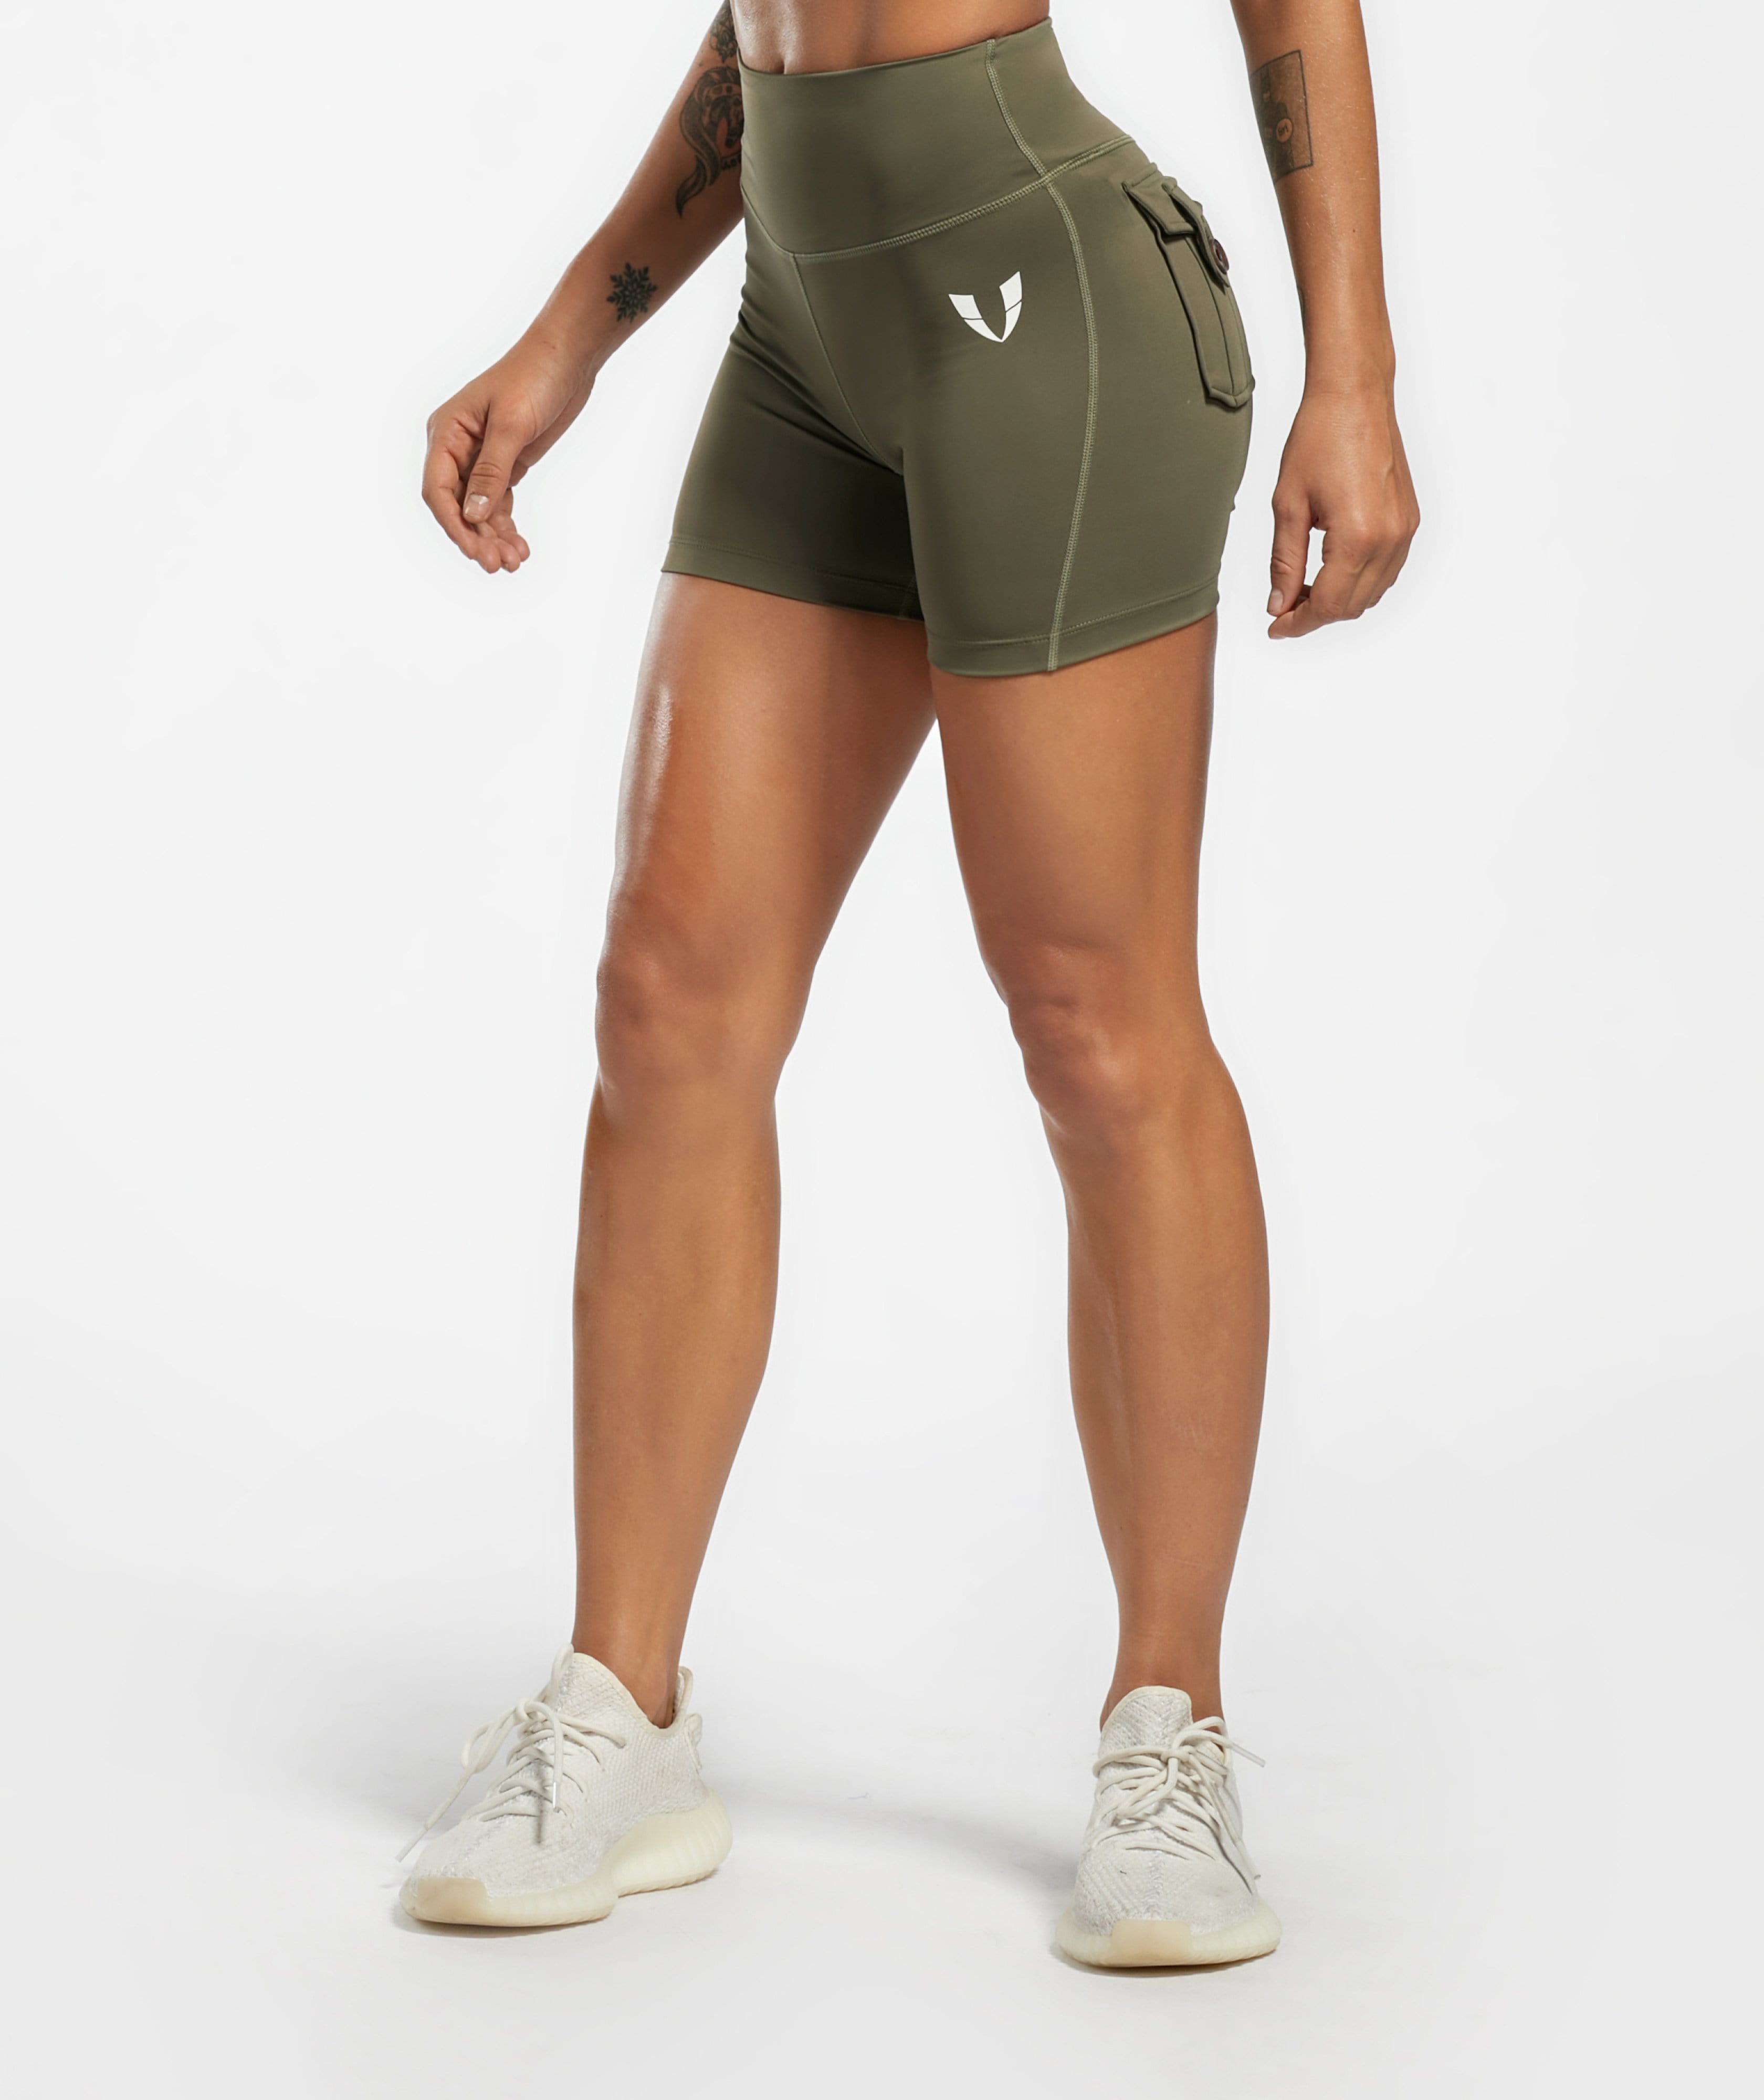 Firmabs Cargo Short Shorts - Olive | FIRM ABS | Reviews on Judge.me